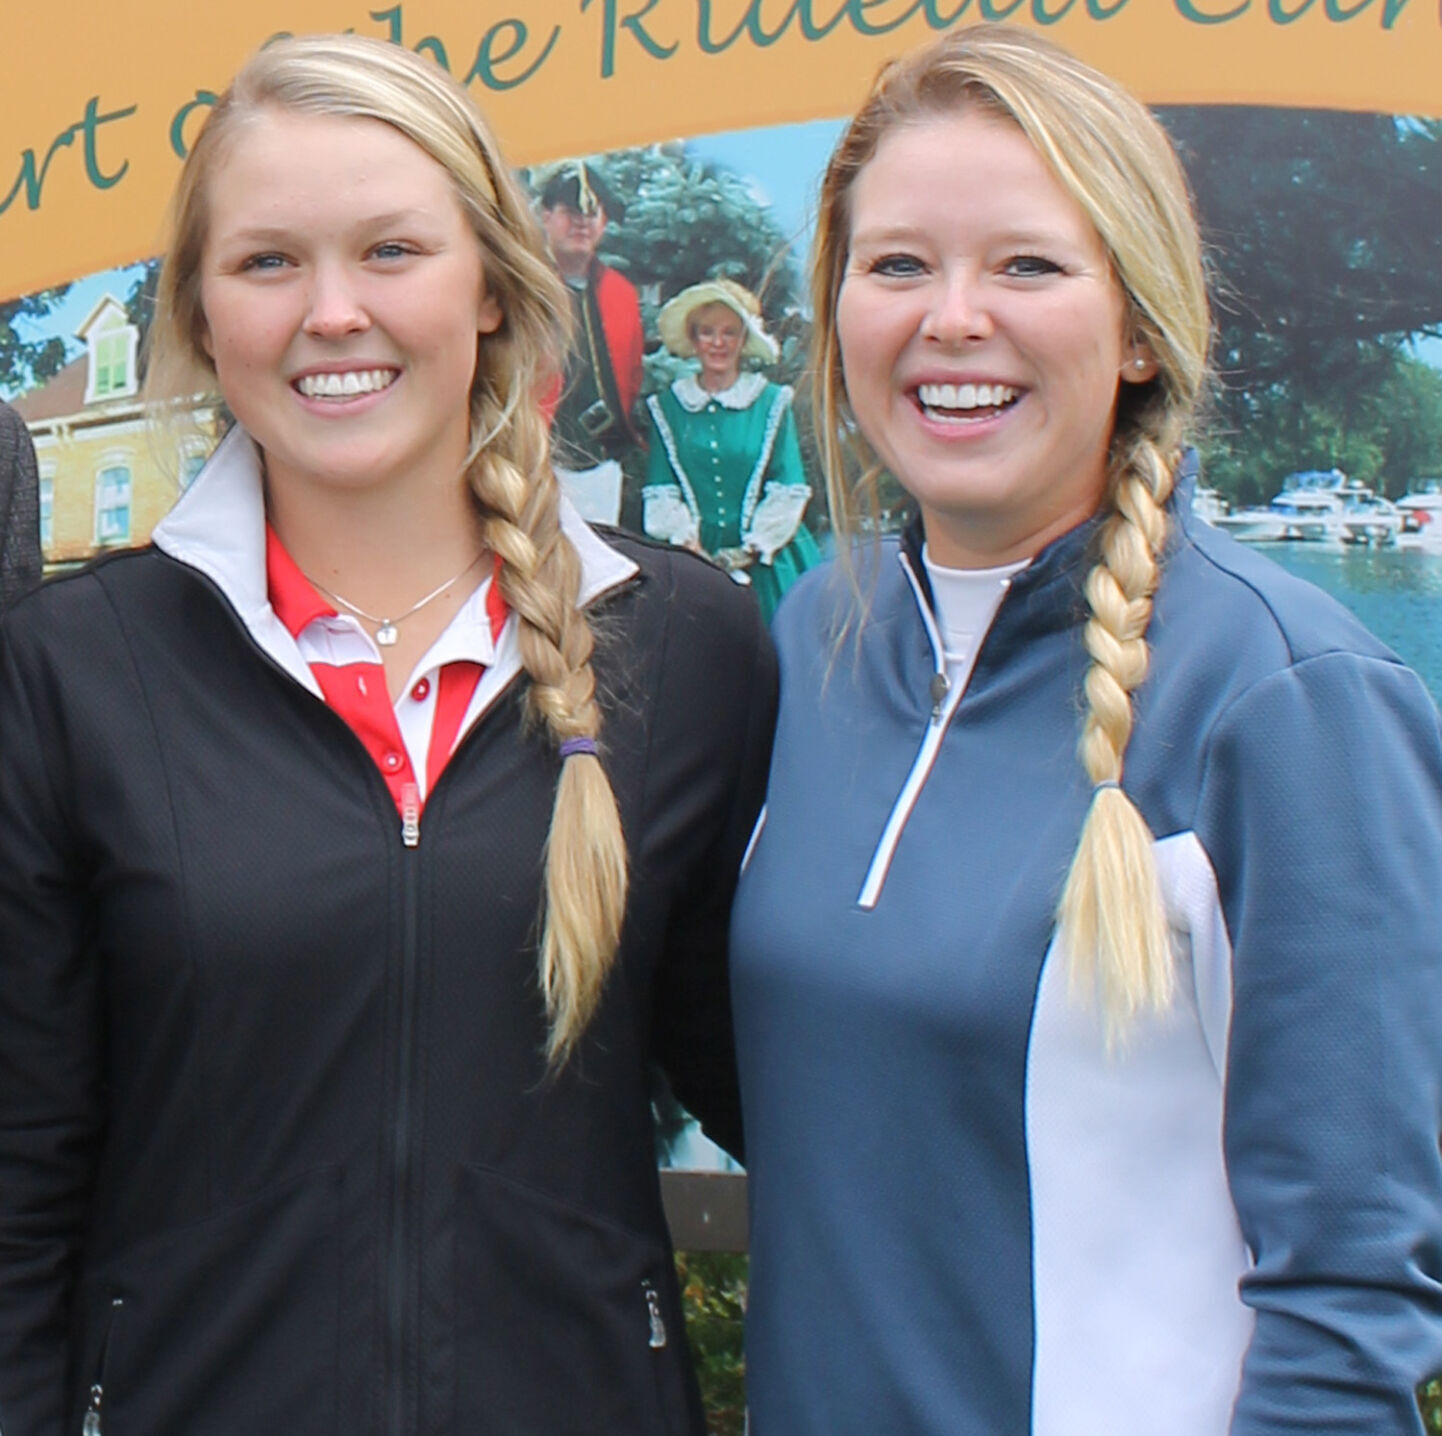 Henderson sisters will host their first Pro-Am golf tournament June 15 in Smiths Falls picture